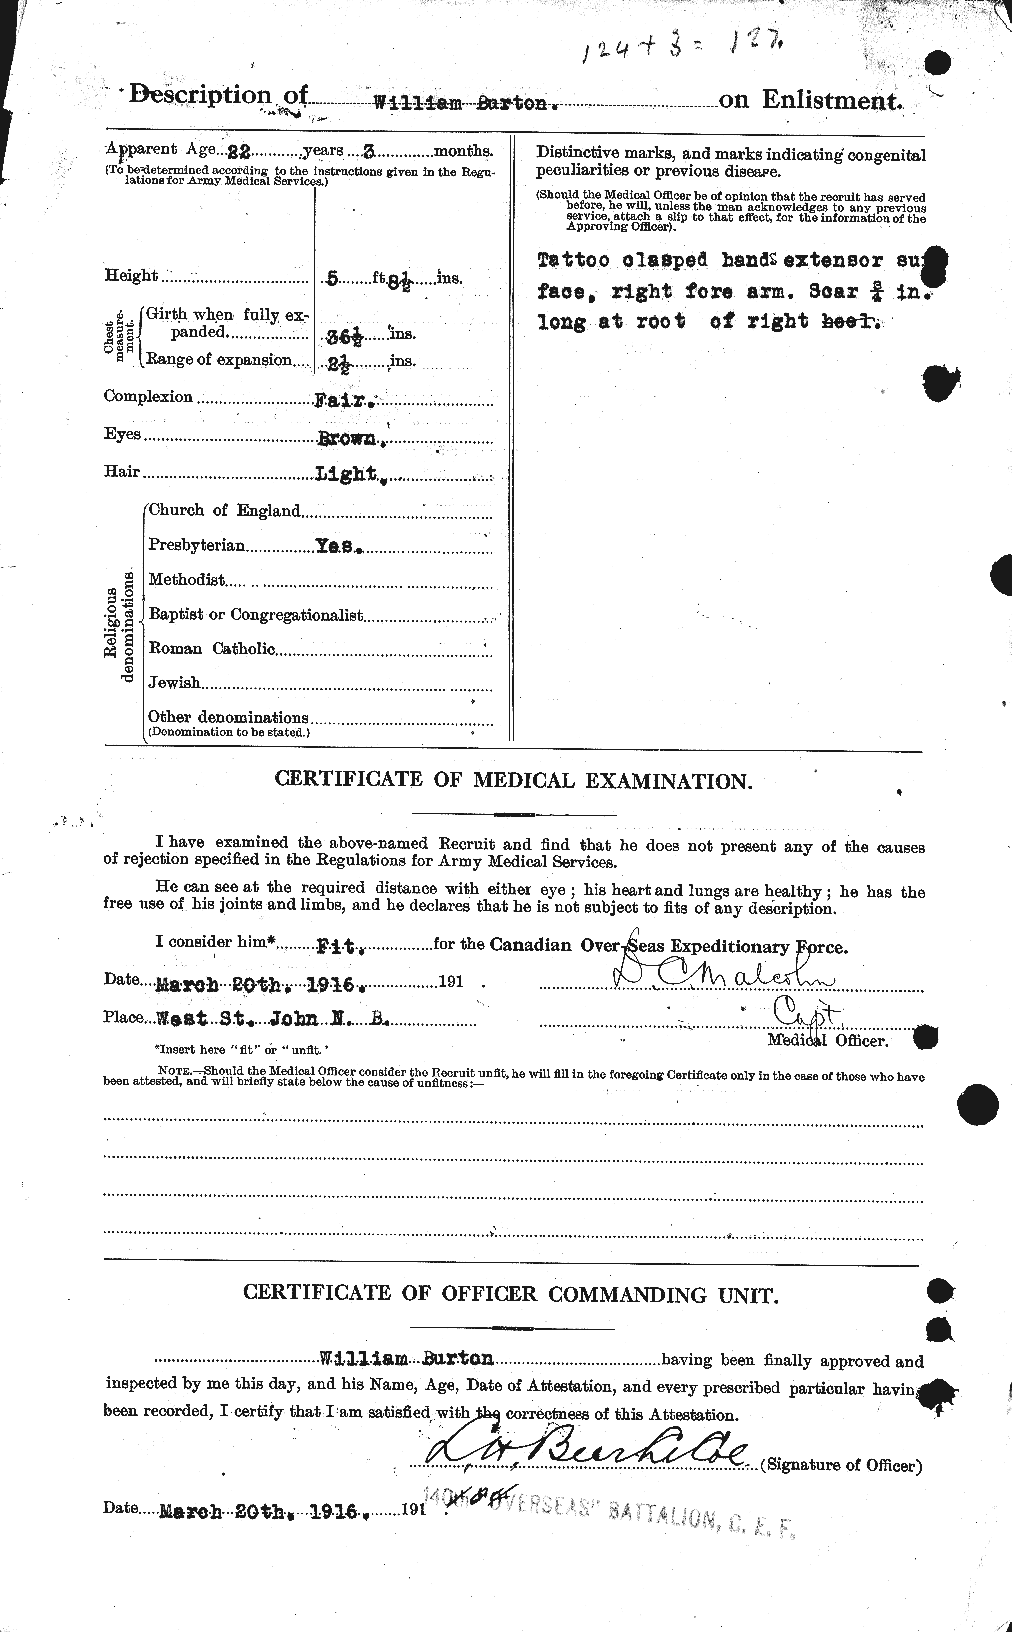 Personnel Records of the First World War - CEF 272756b